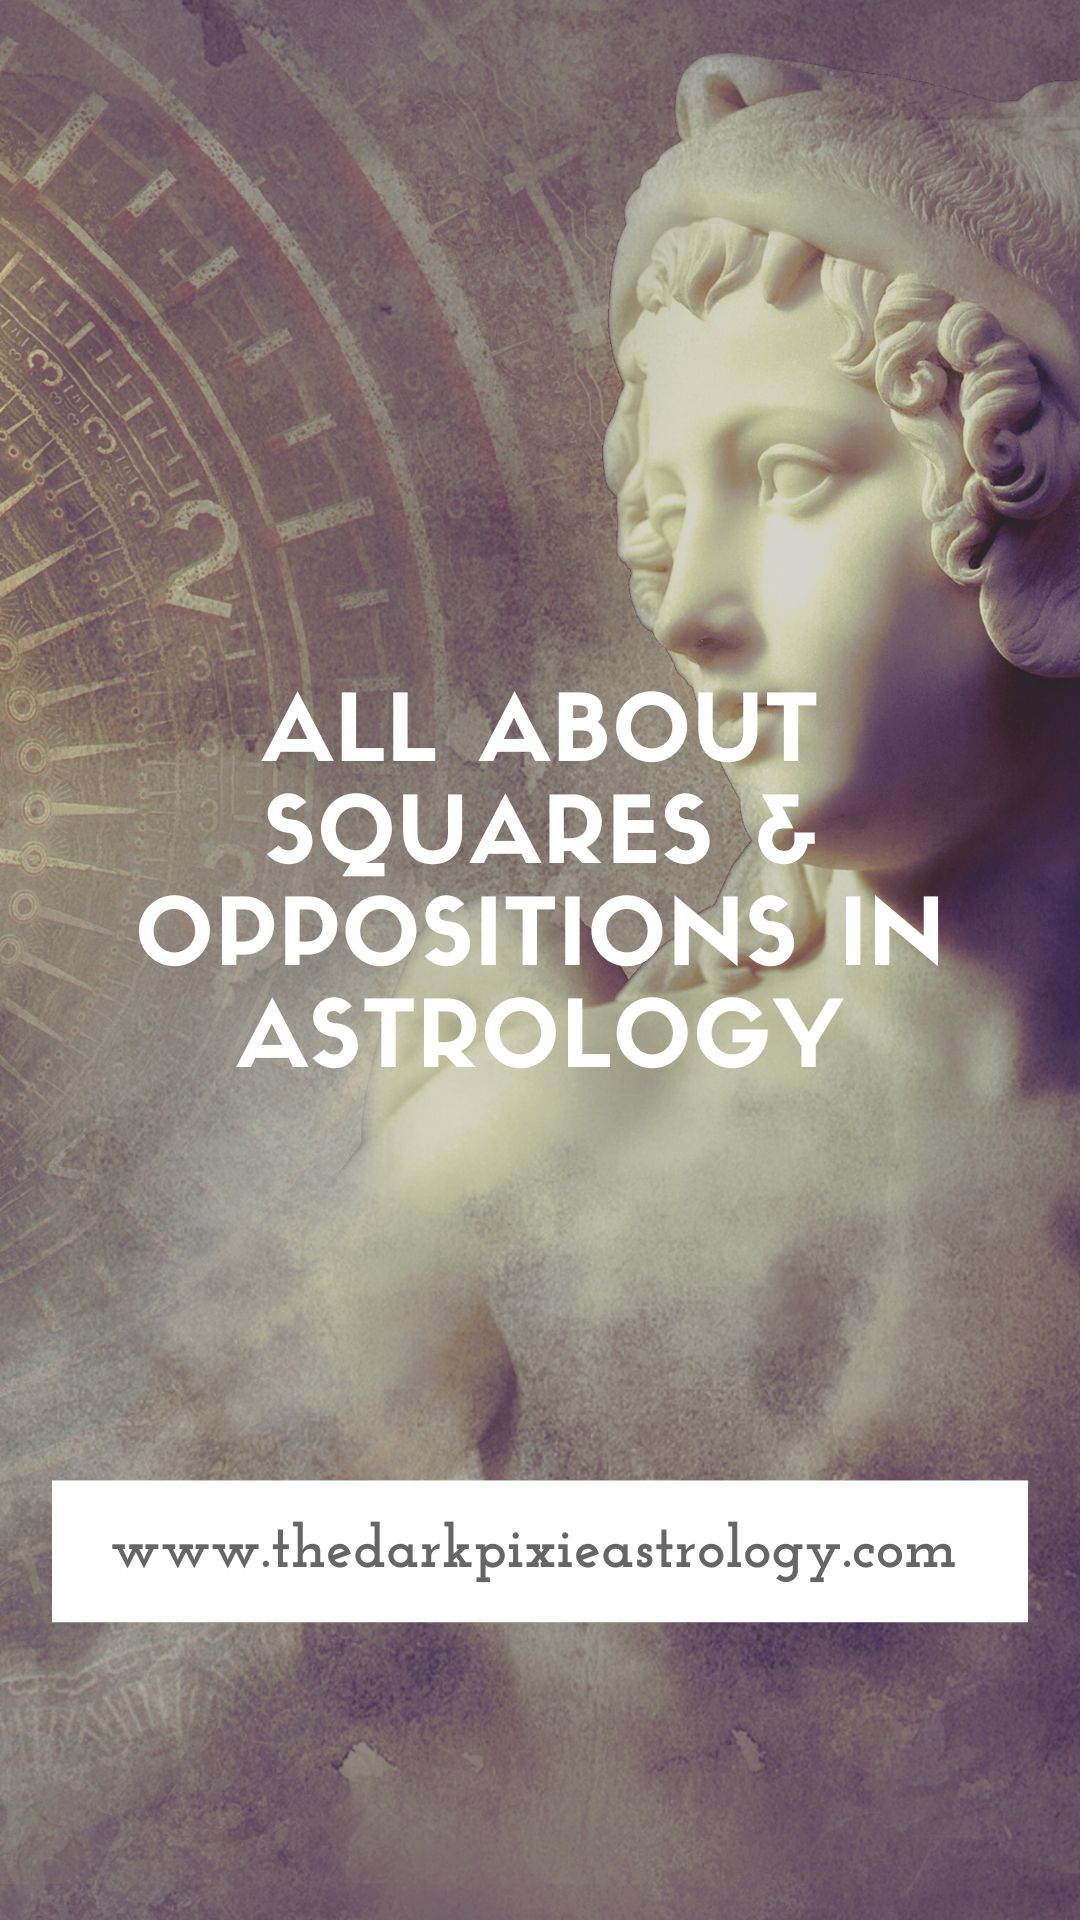 All About Squares & Oppositions in Astrology - The Dark Pixie Astrology